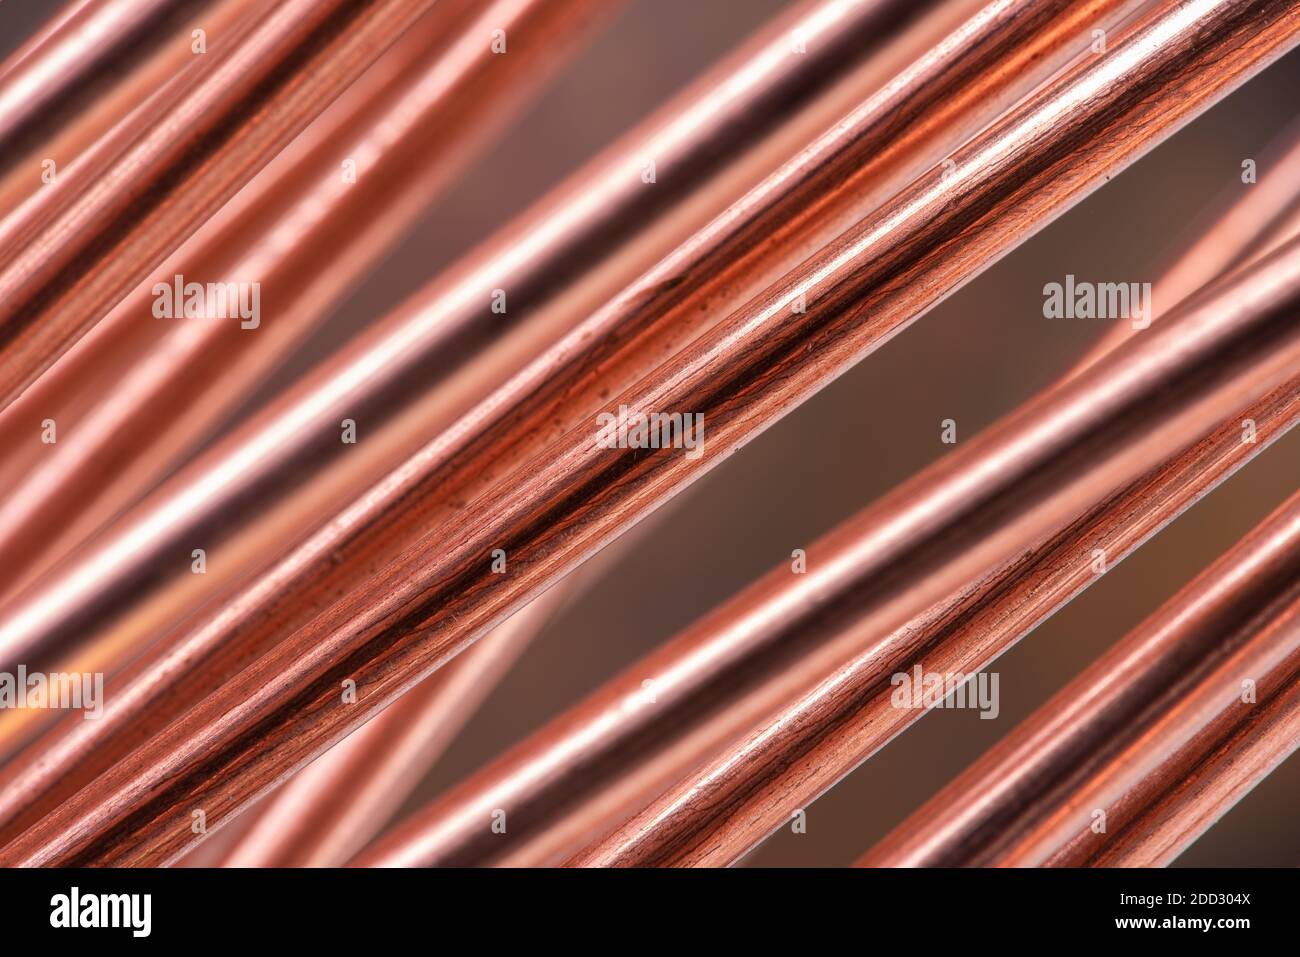 Copper wire, raw material and energy industry component Stock Photo